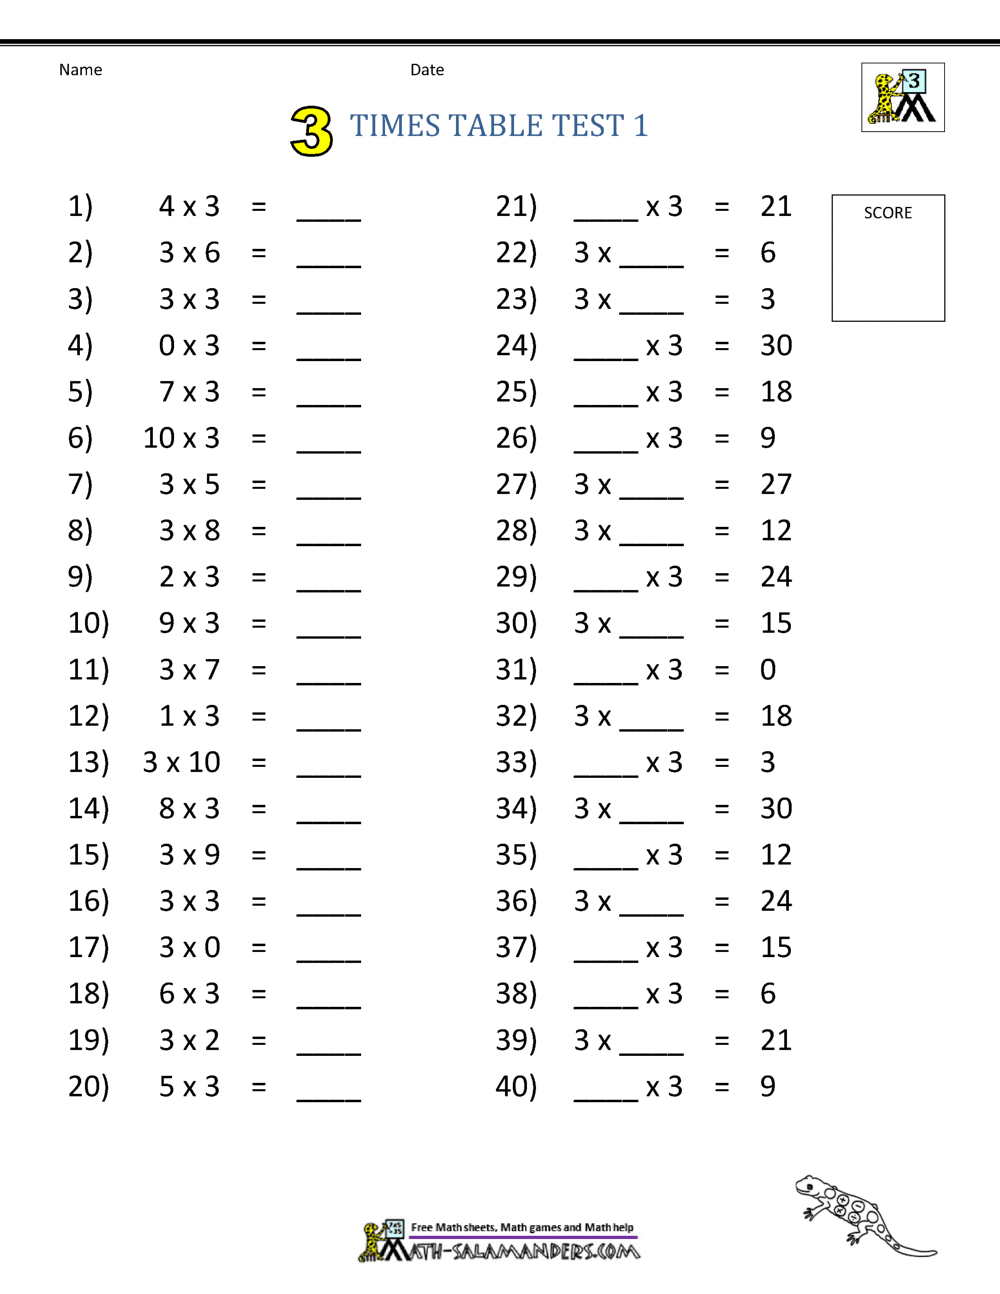 Times Table Tests - 2 3 4 5 10 Times Tables education, learning, worksheets, alphabet worksheets, free worksheets, and printable worksheets Multiplication Worksheets 0 1 2 1294 x 1000